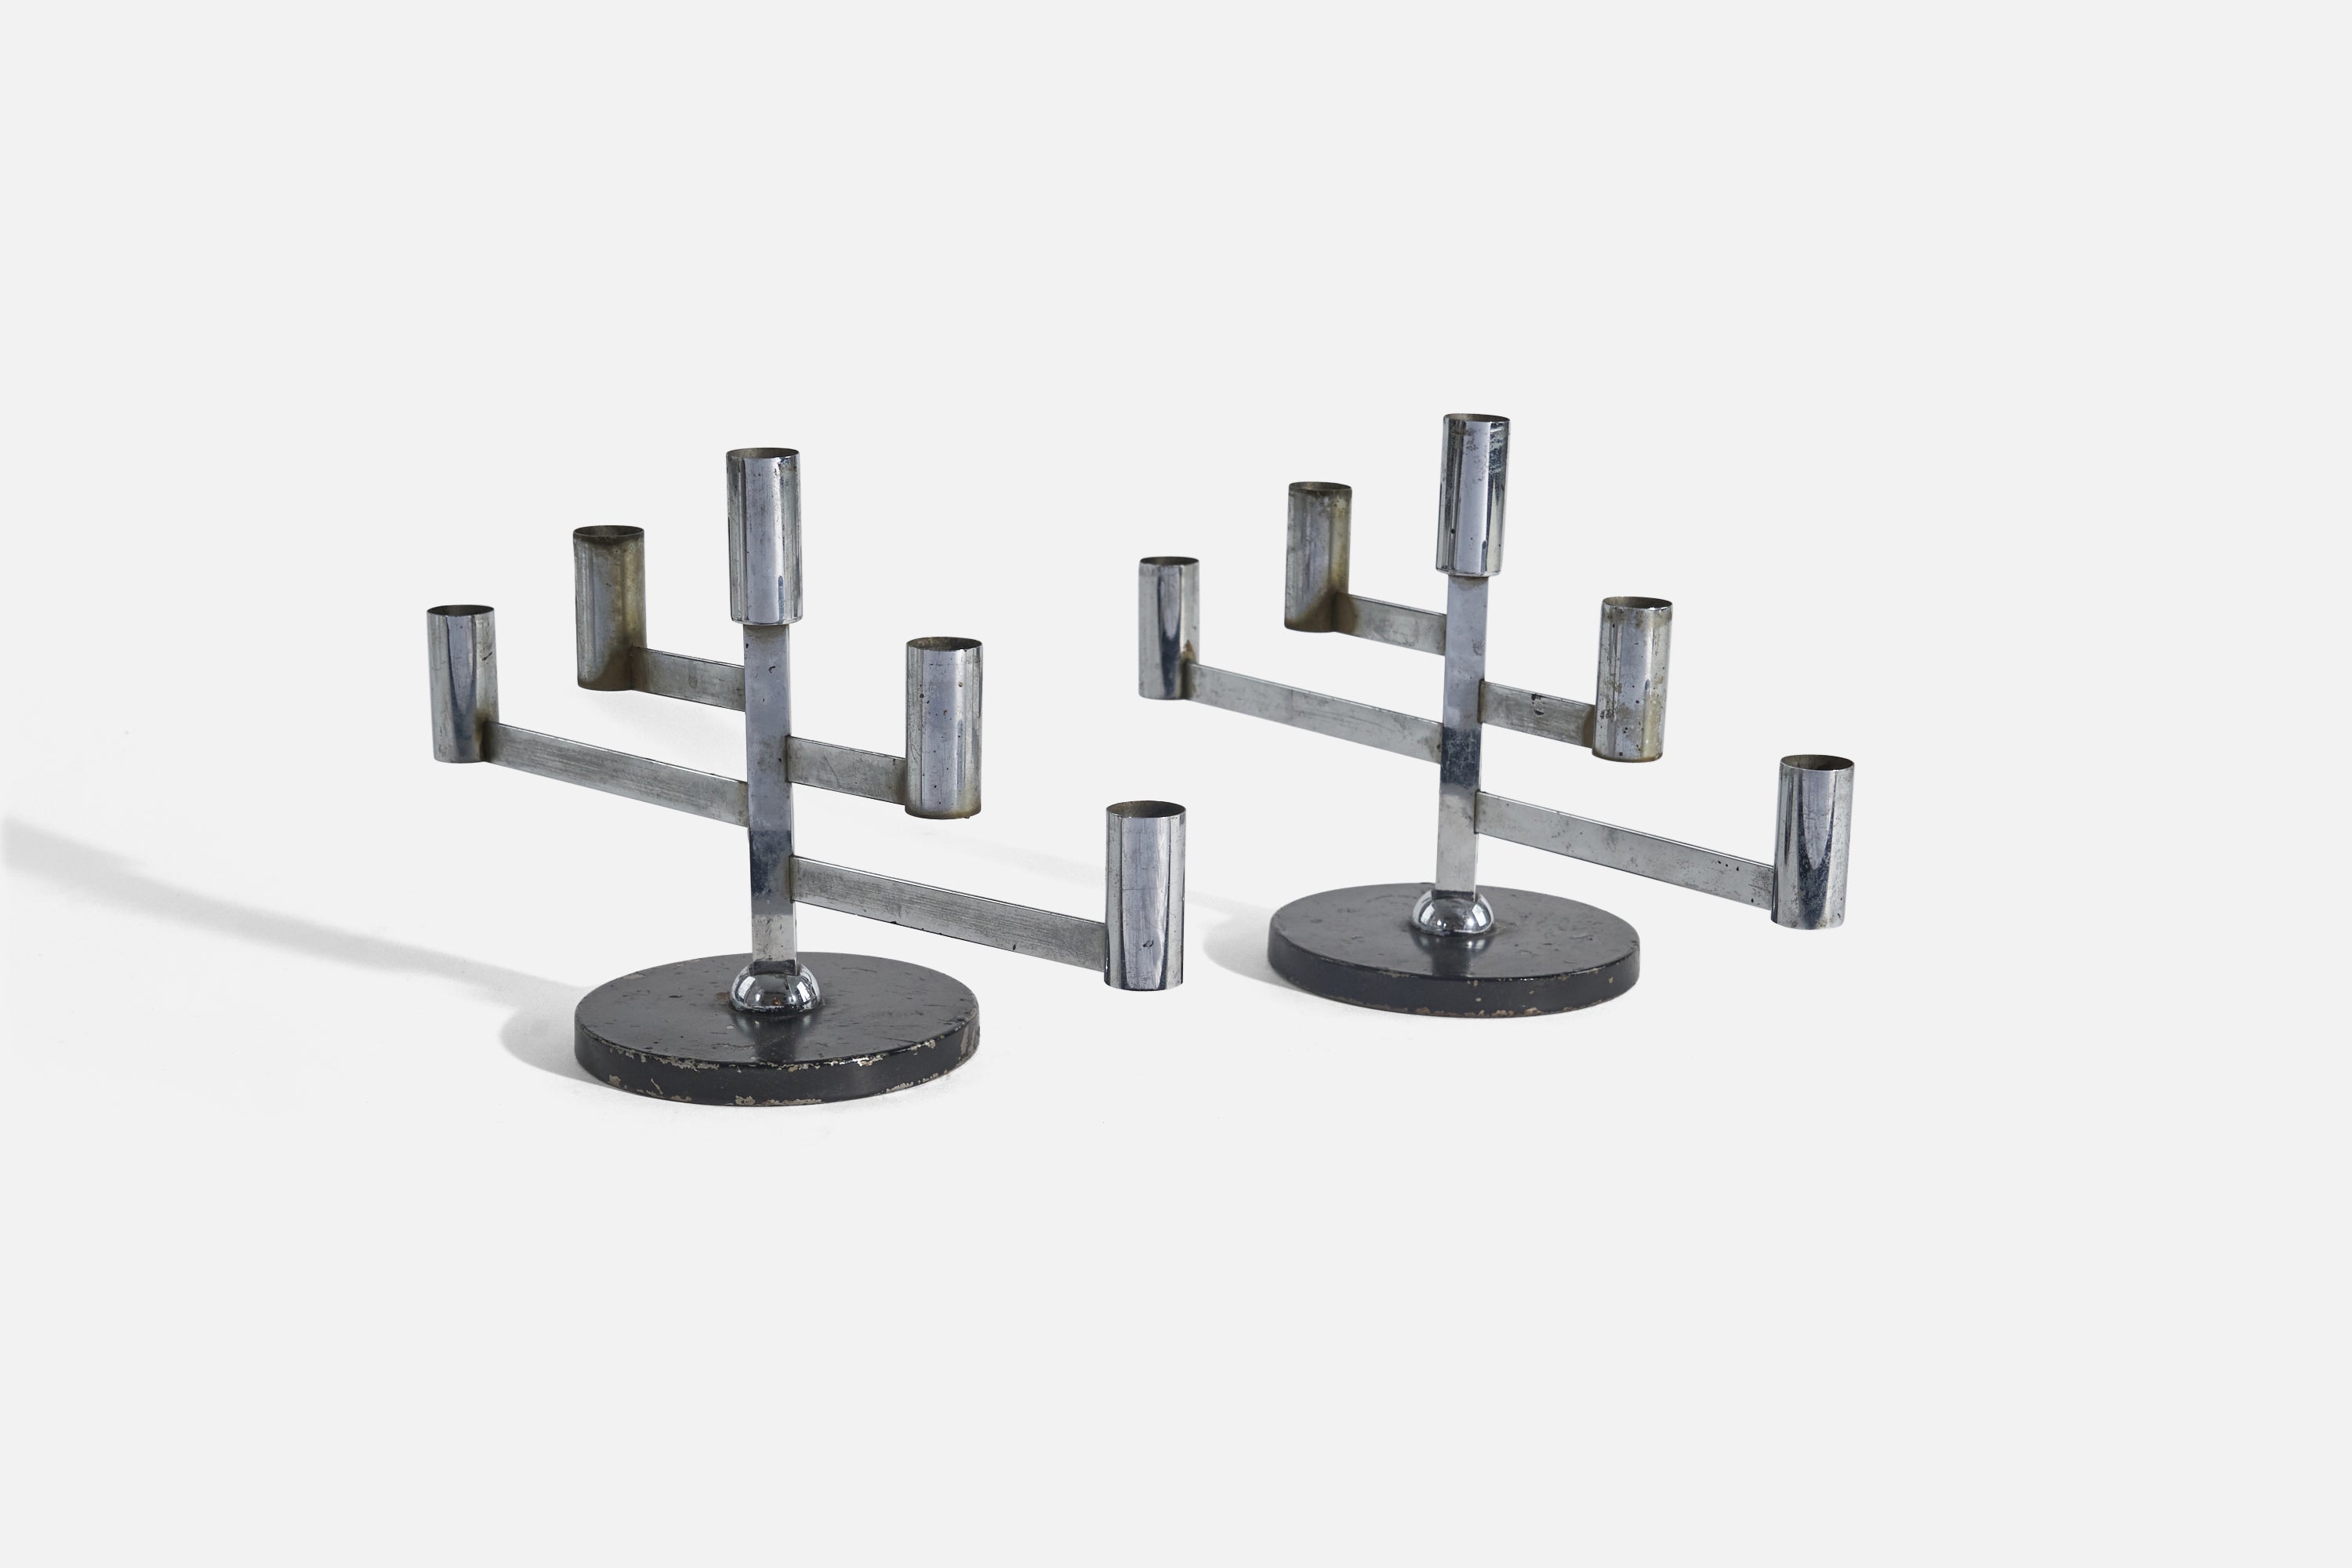 Mexican Designer, Candelabras, Chromed Steel, Lacquered Tin-Plate, Wood, 1940s For Sale